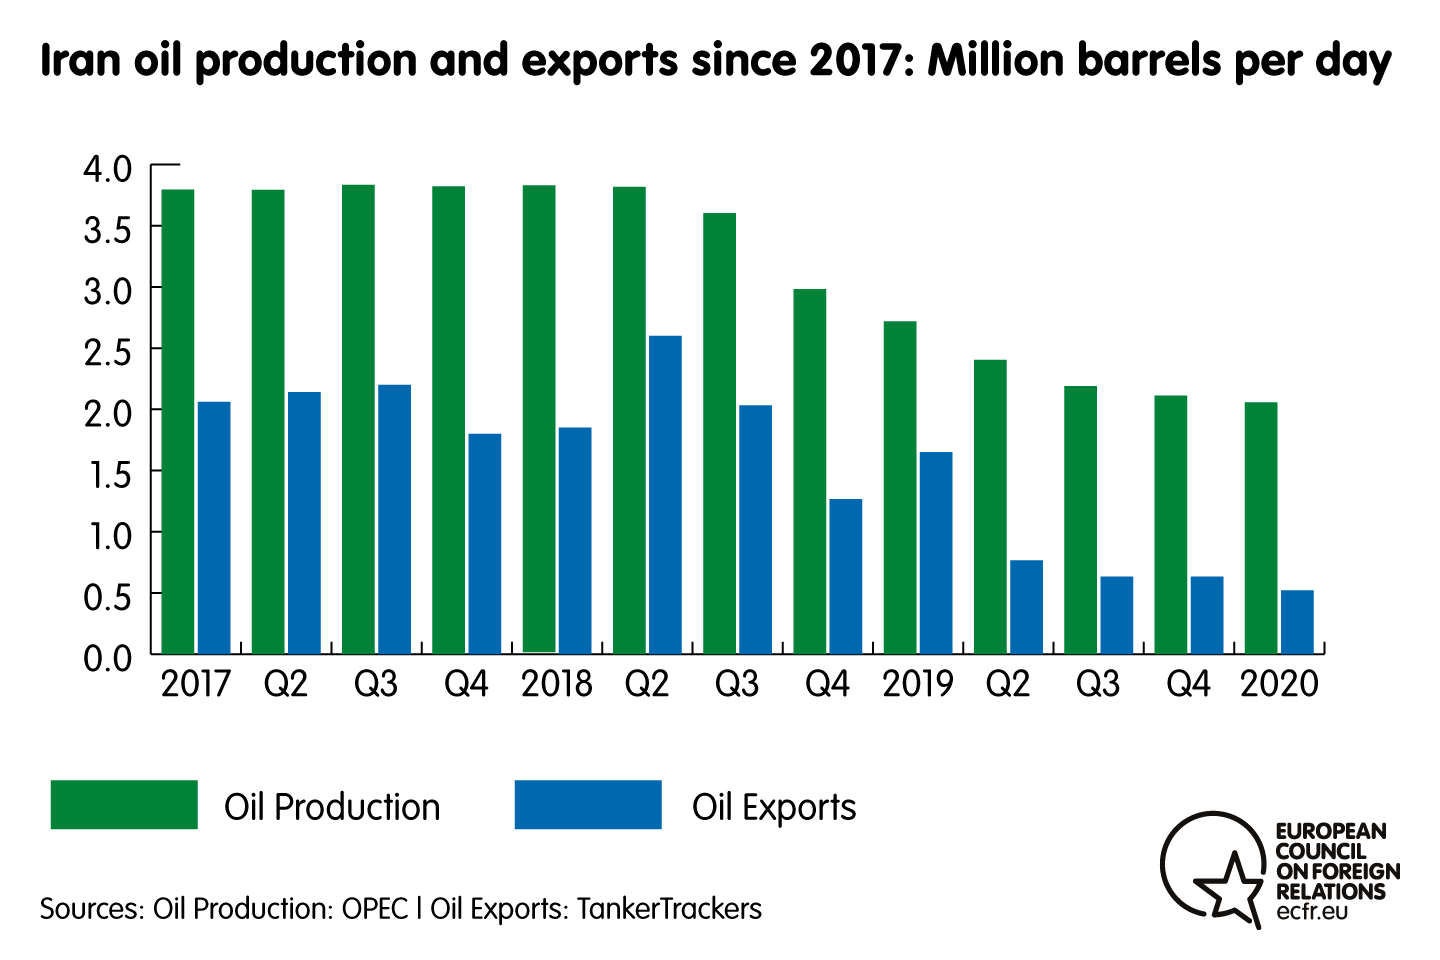 Chart of Iran oil production and exports since 2017 in million barrels per day